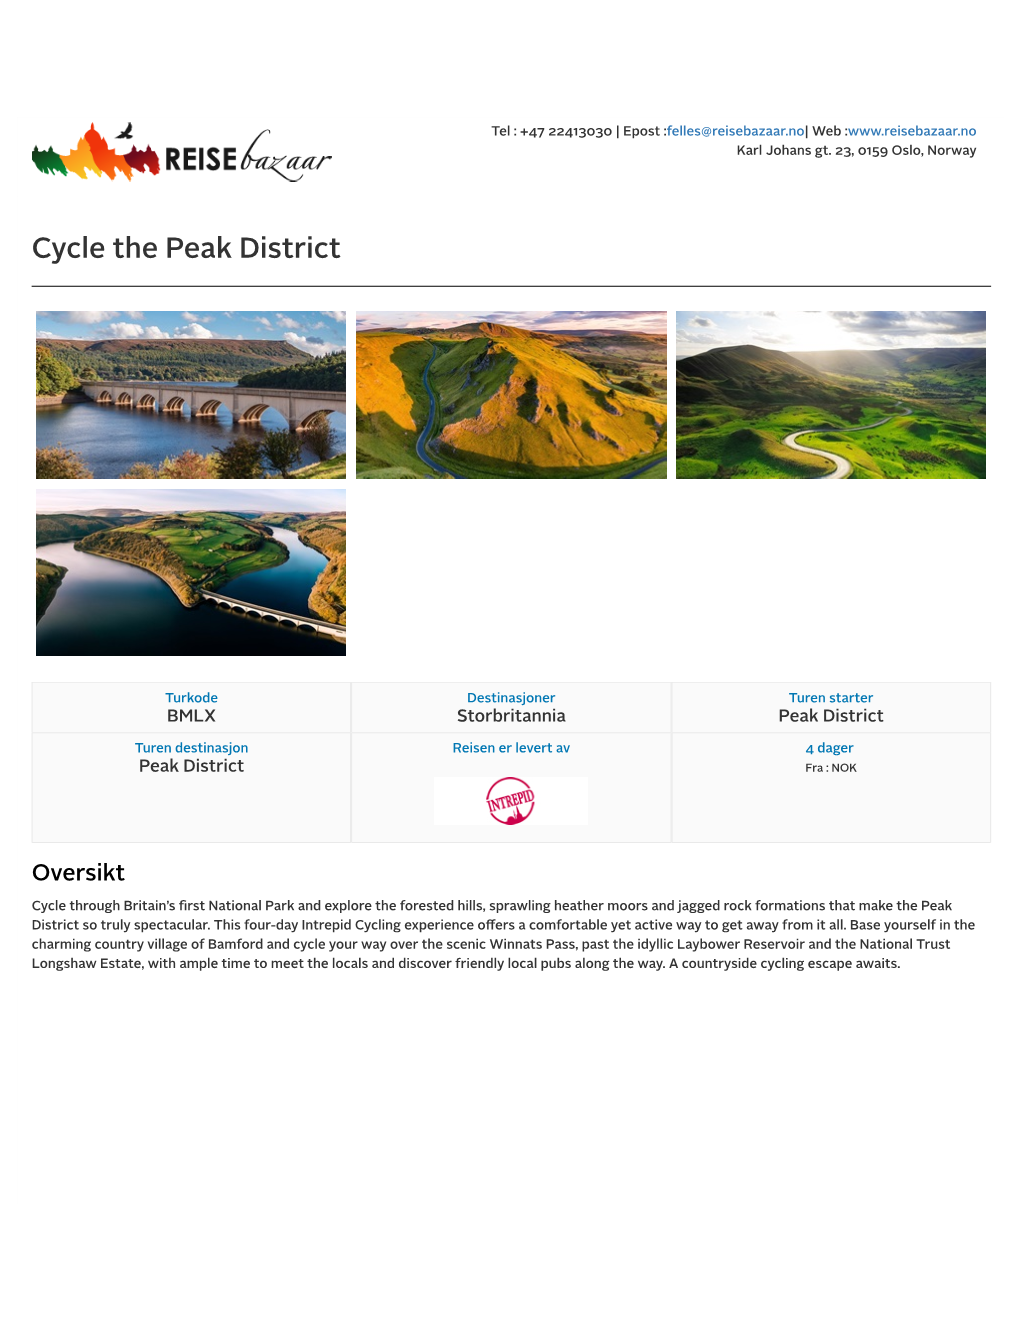 Cycle the Peak District